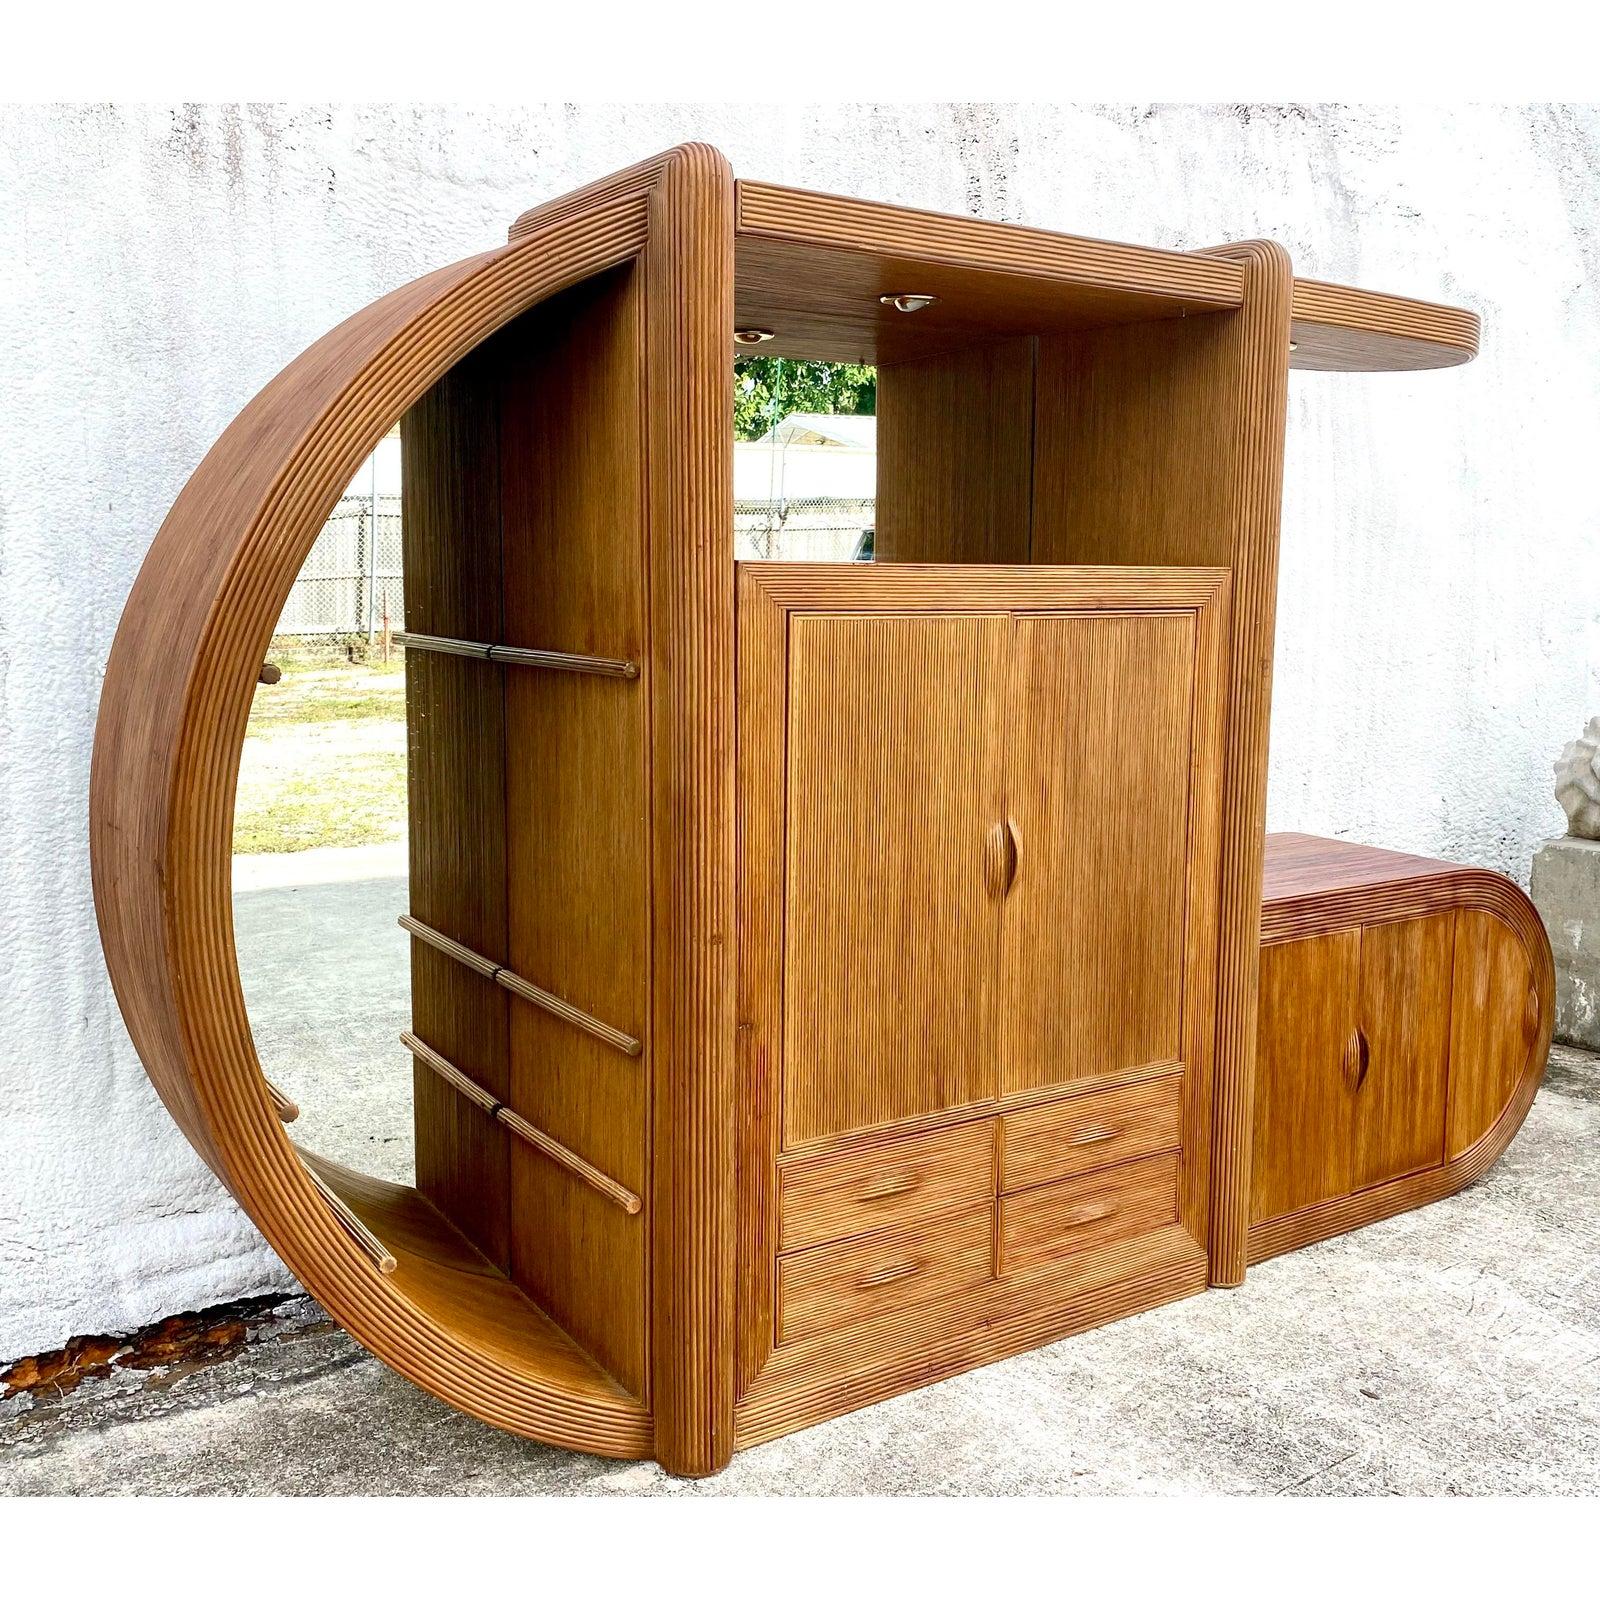 Incredible vintage MCM wall unit. Beautiful pencil reed frame in a fantastic organic shape. Striking and dramatic arch with lots of practical storage. Glass shelves in the half moon section and mirrored back walls on the first two sections. Acquired